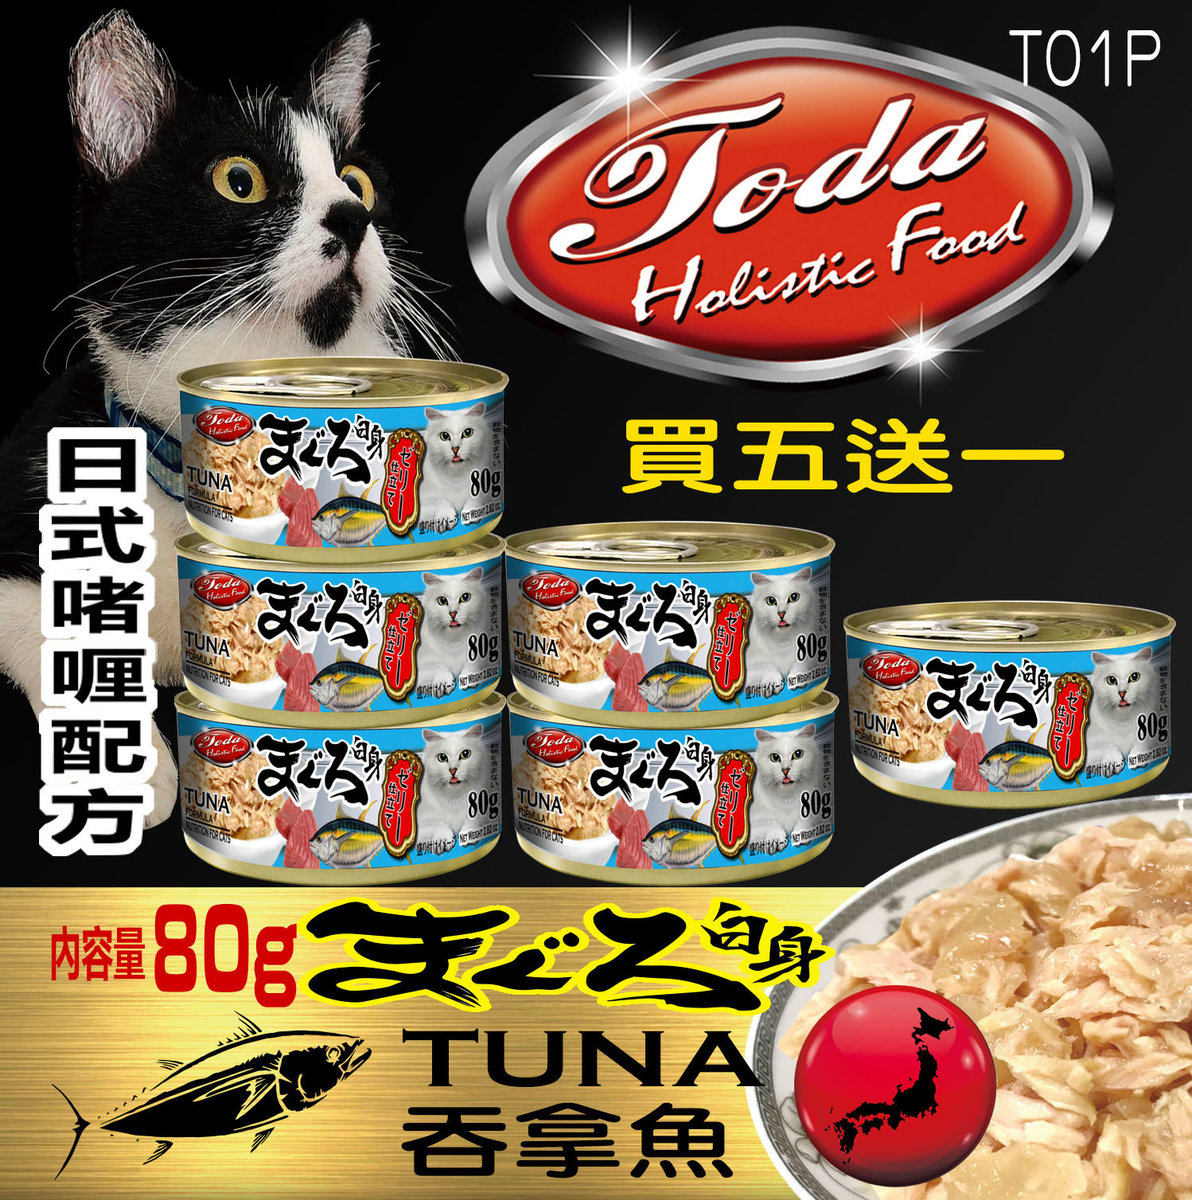 Toda Japanese-style Jelly Formula - Tuna 6X 80g / Canned T20004P  (buy 5 get 1free)